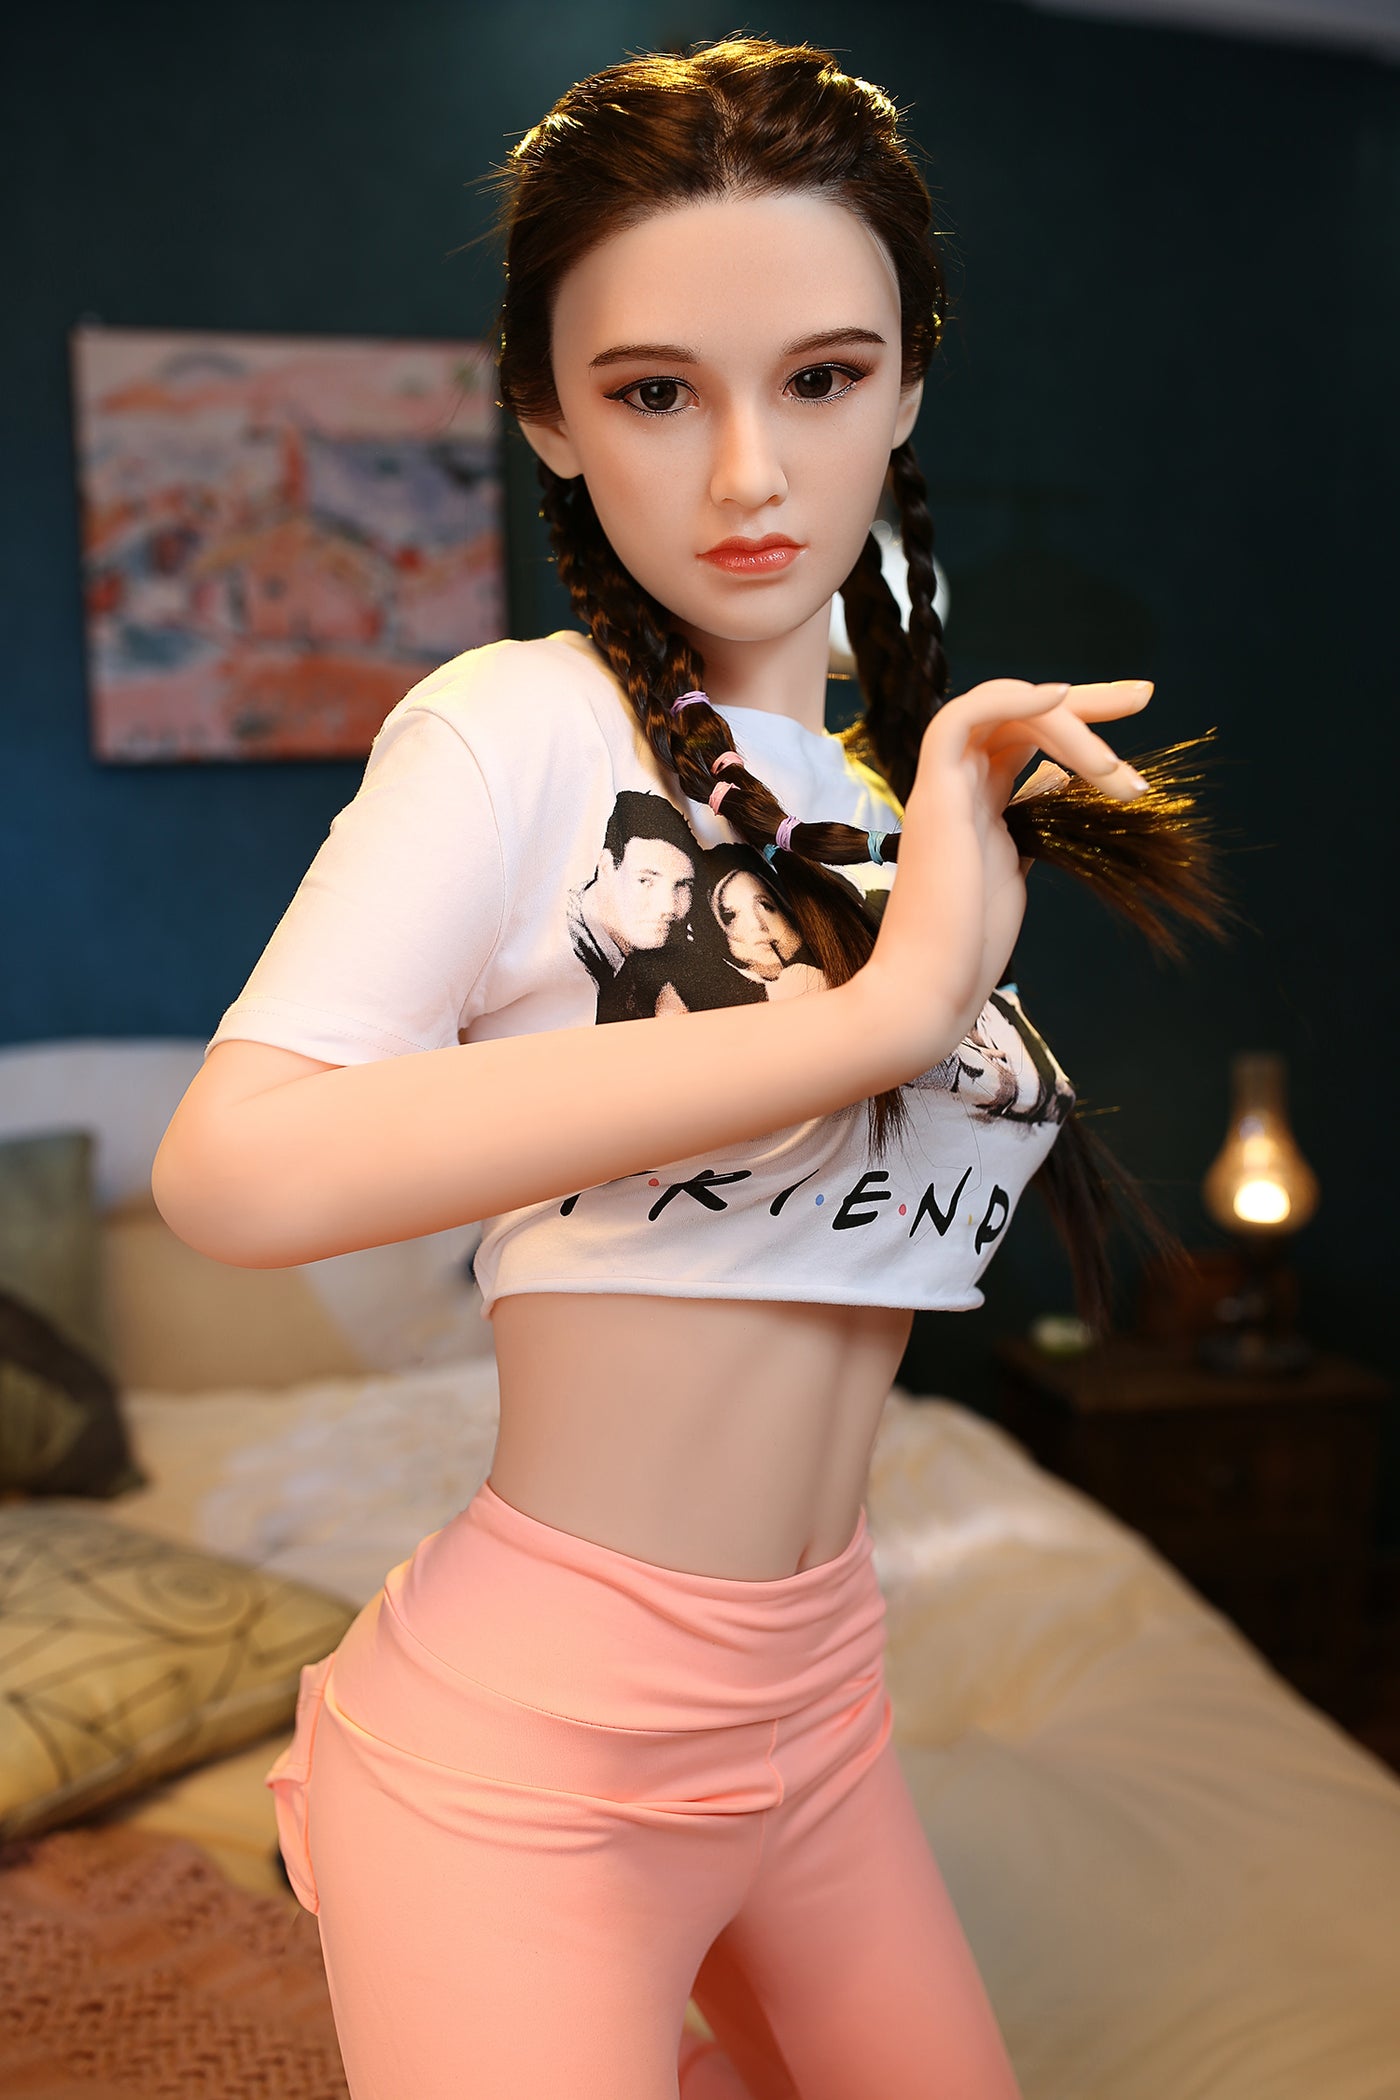 Phoenix 5ft3 sex doll | Rose Wives Doll